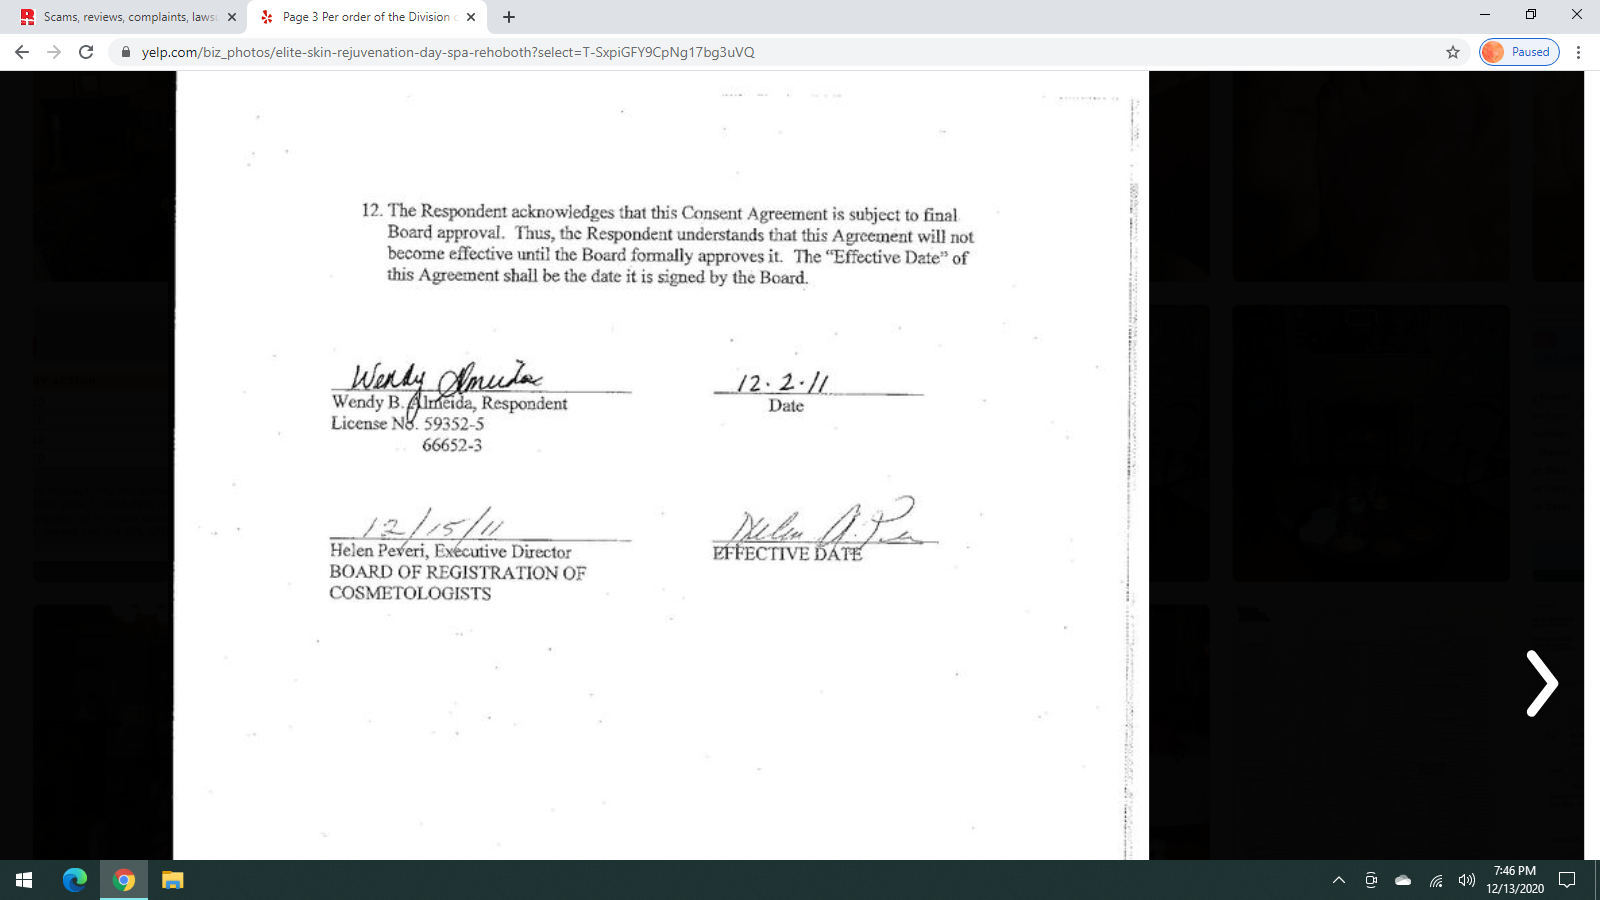 Page 3 of the D.P.L. order